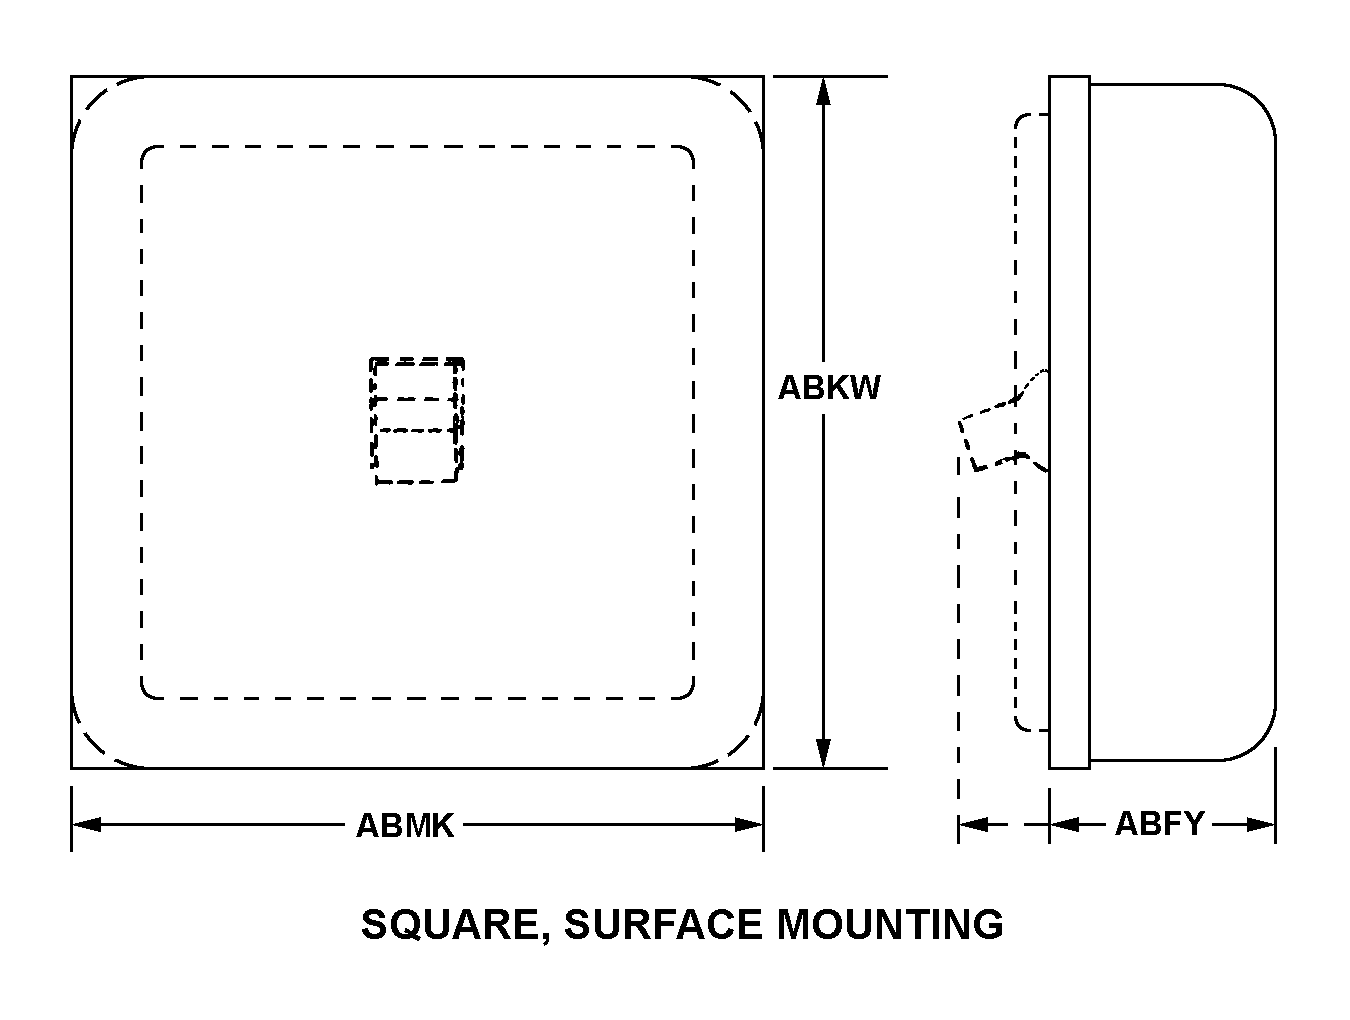 SQUARE, SURFACE MOUNTING style nsn 5940-01-625-4452